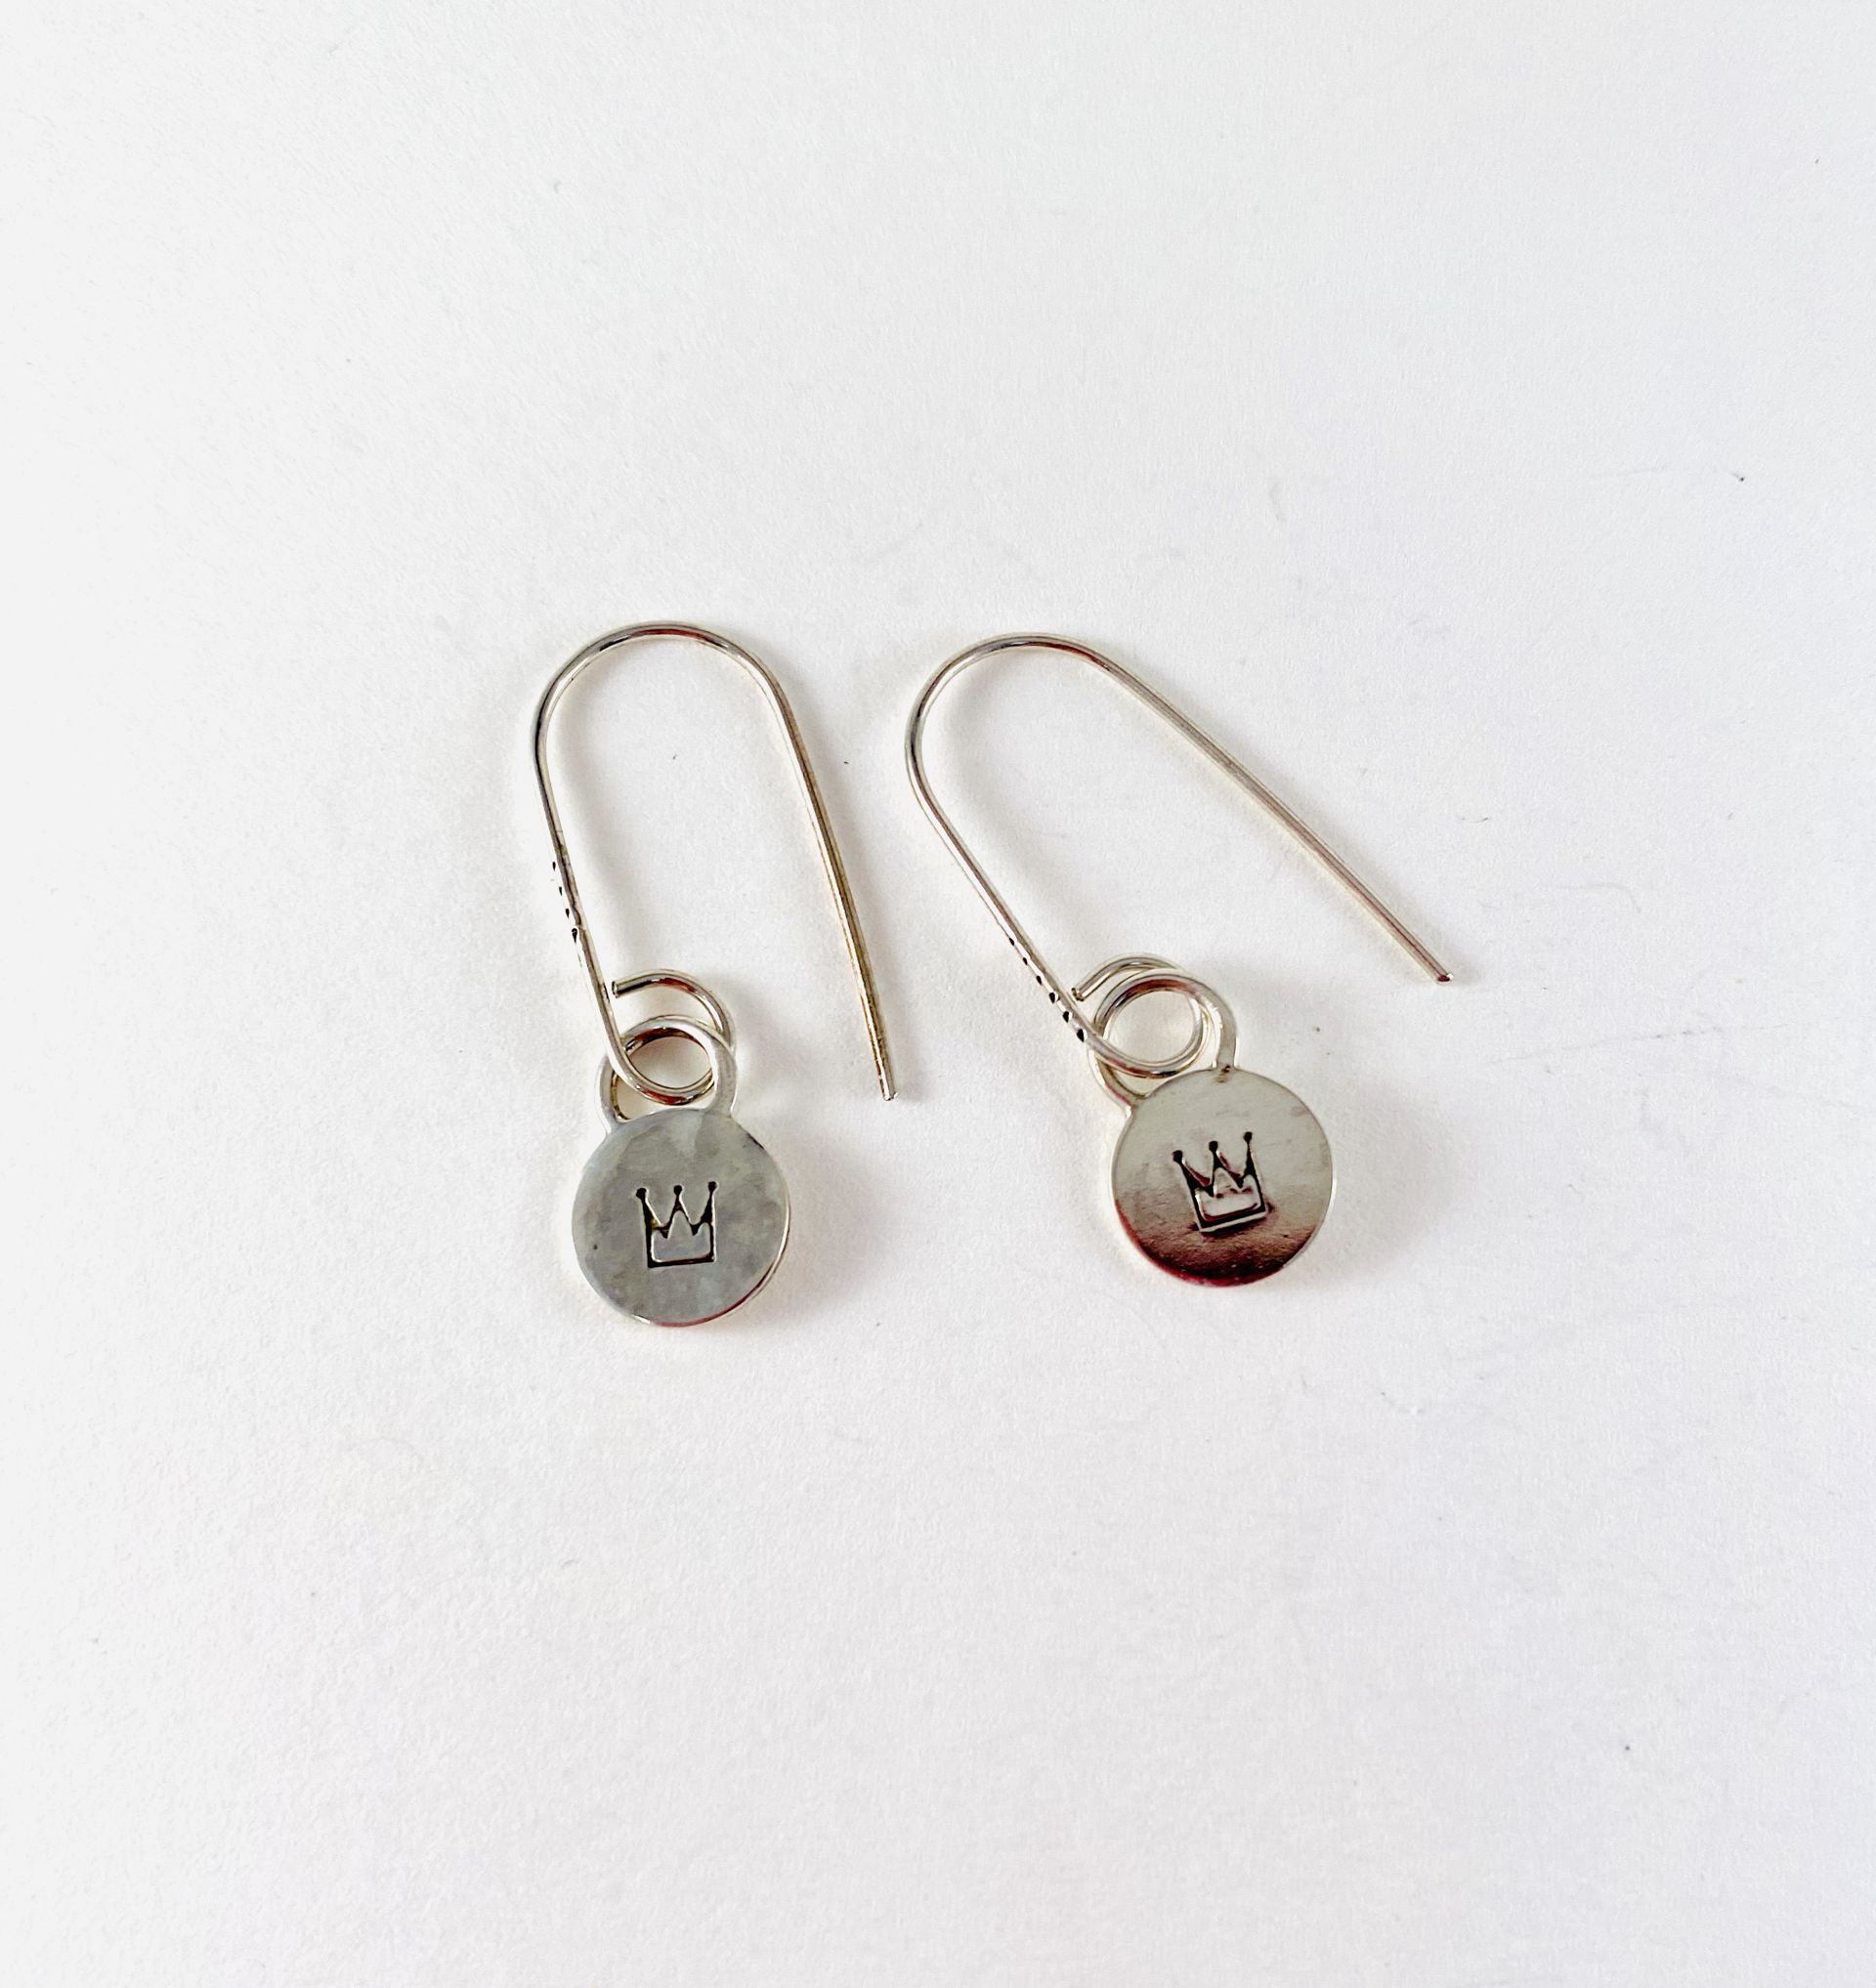 Silver Crown Stamp Earrings #21 by Shelby Lee - jewelry